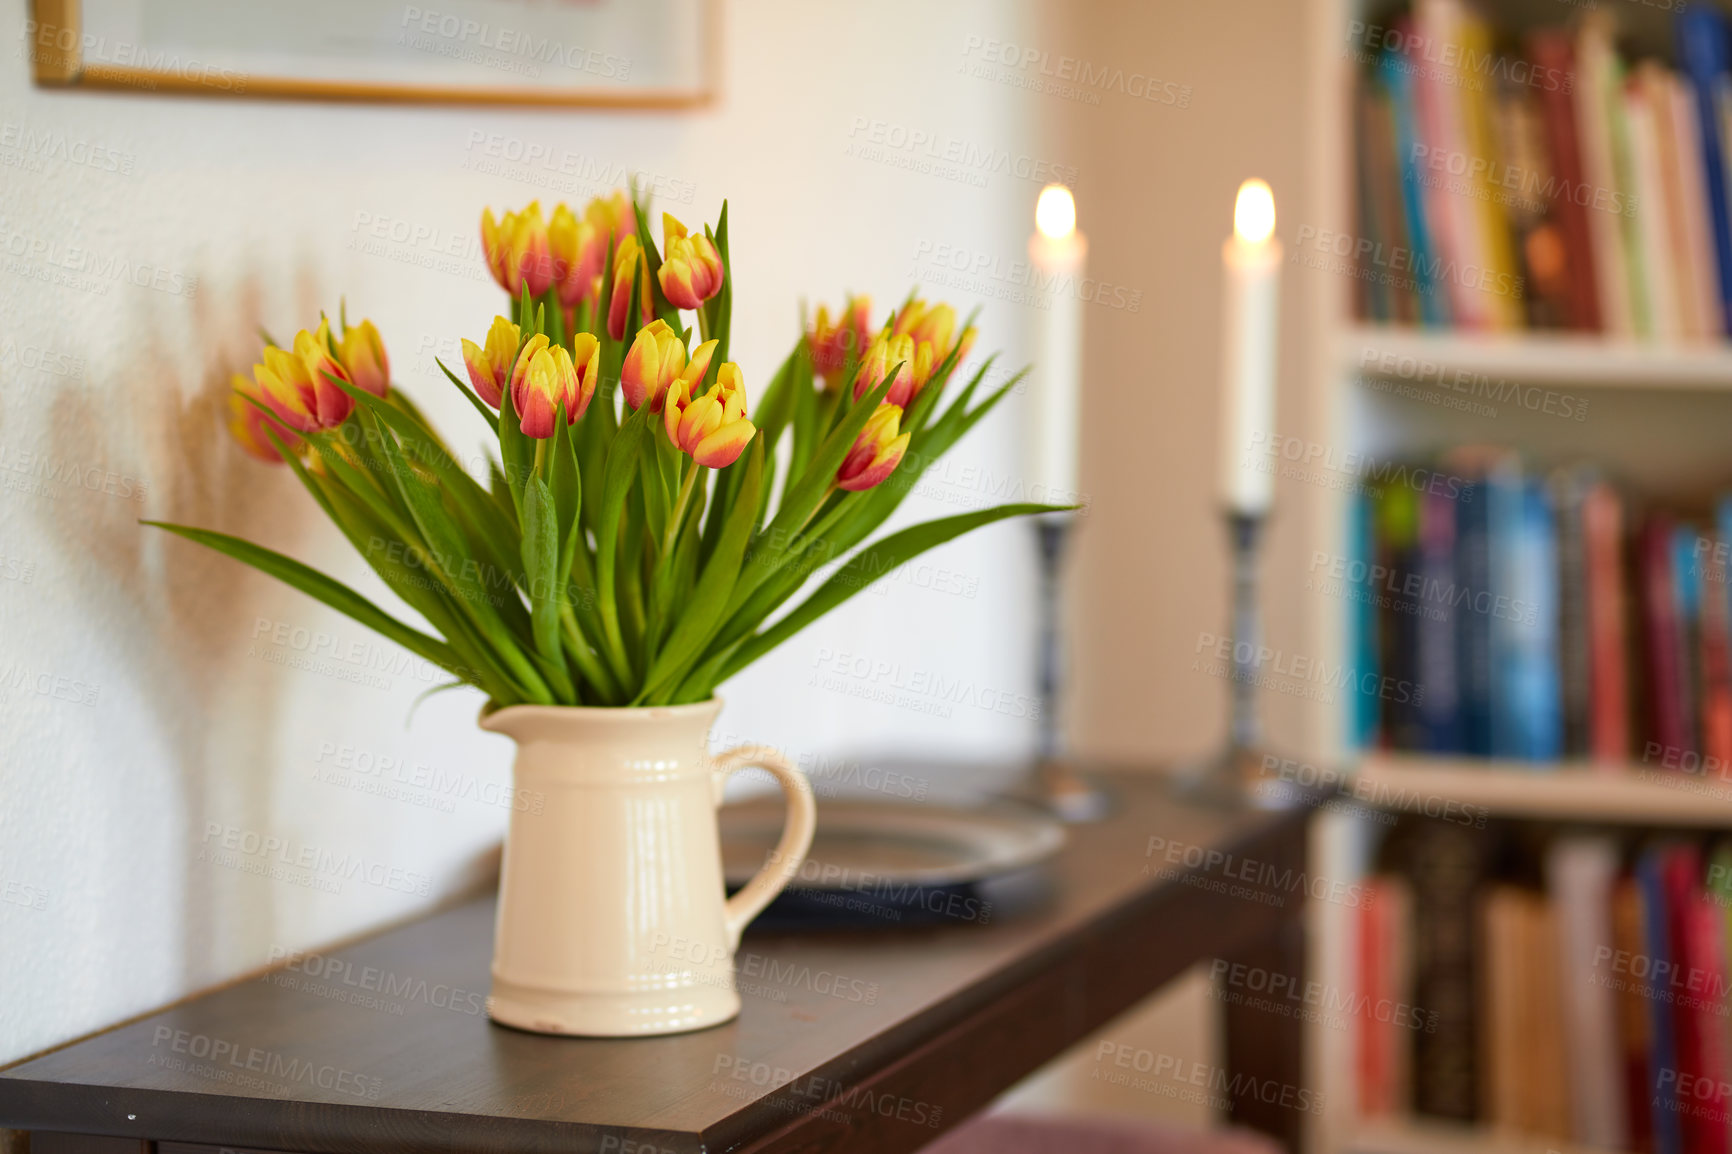 Buy stock photo Bouquet of yellow tulips in a vase as a living room decoration or centrepiece symbolising love, affection or caring gesture. Bunch of freshly cut flowers on a wooden table in a home library or study